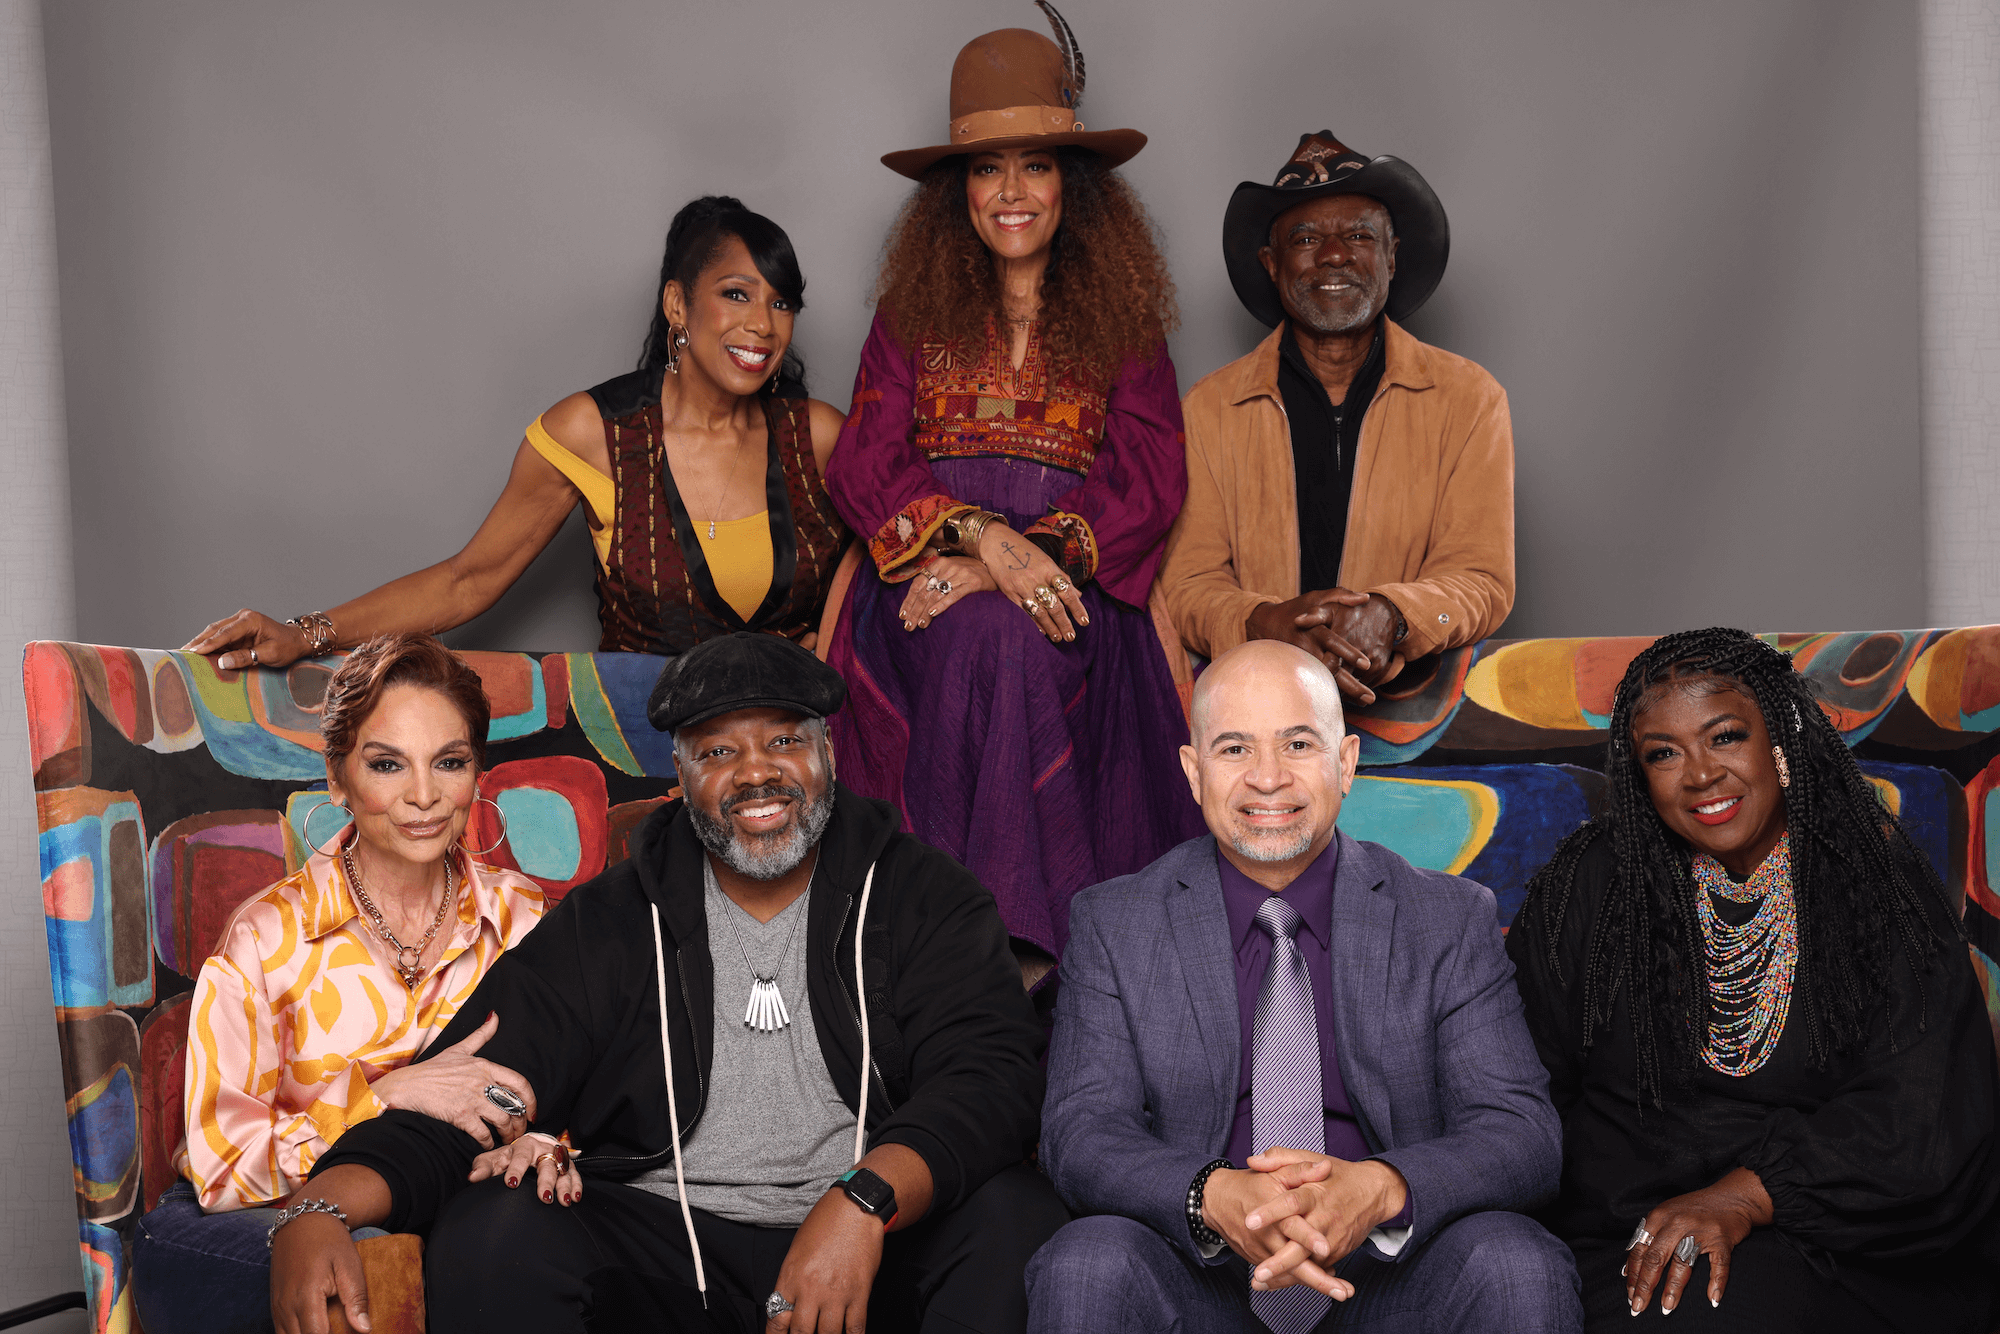 Vice President Kamala Harris Teams Up with ‘A Different World’ Cast to Support HBCUs and Student Debt Relief